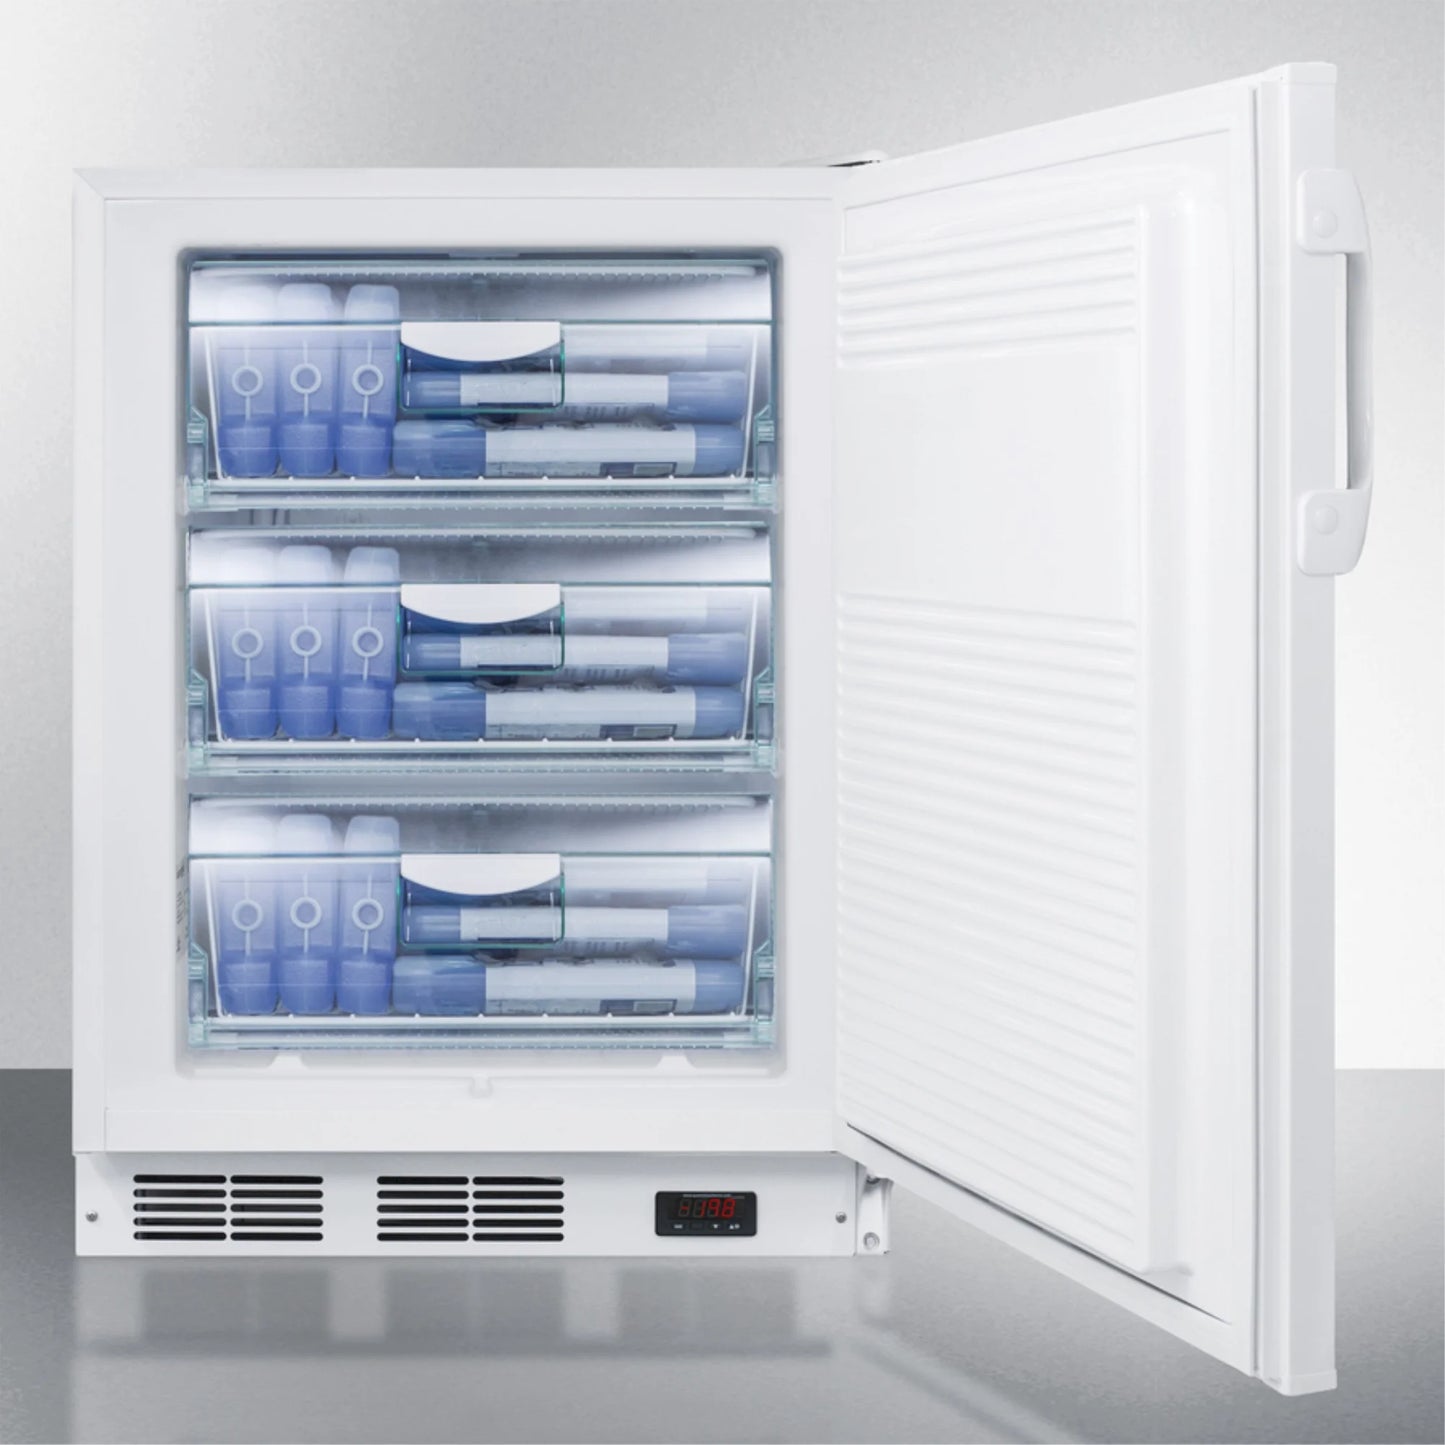 ADA compliant freestanding medical all-freezer capable of -25 C operation, with removable basket drawers and front lock